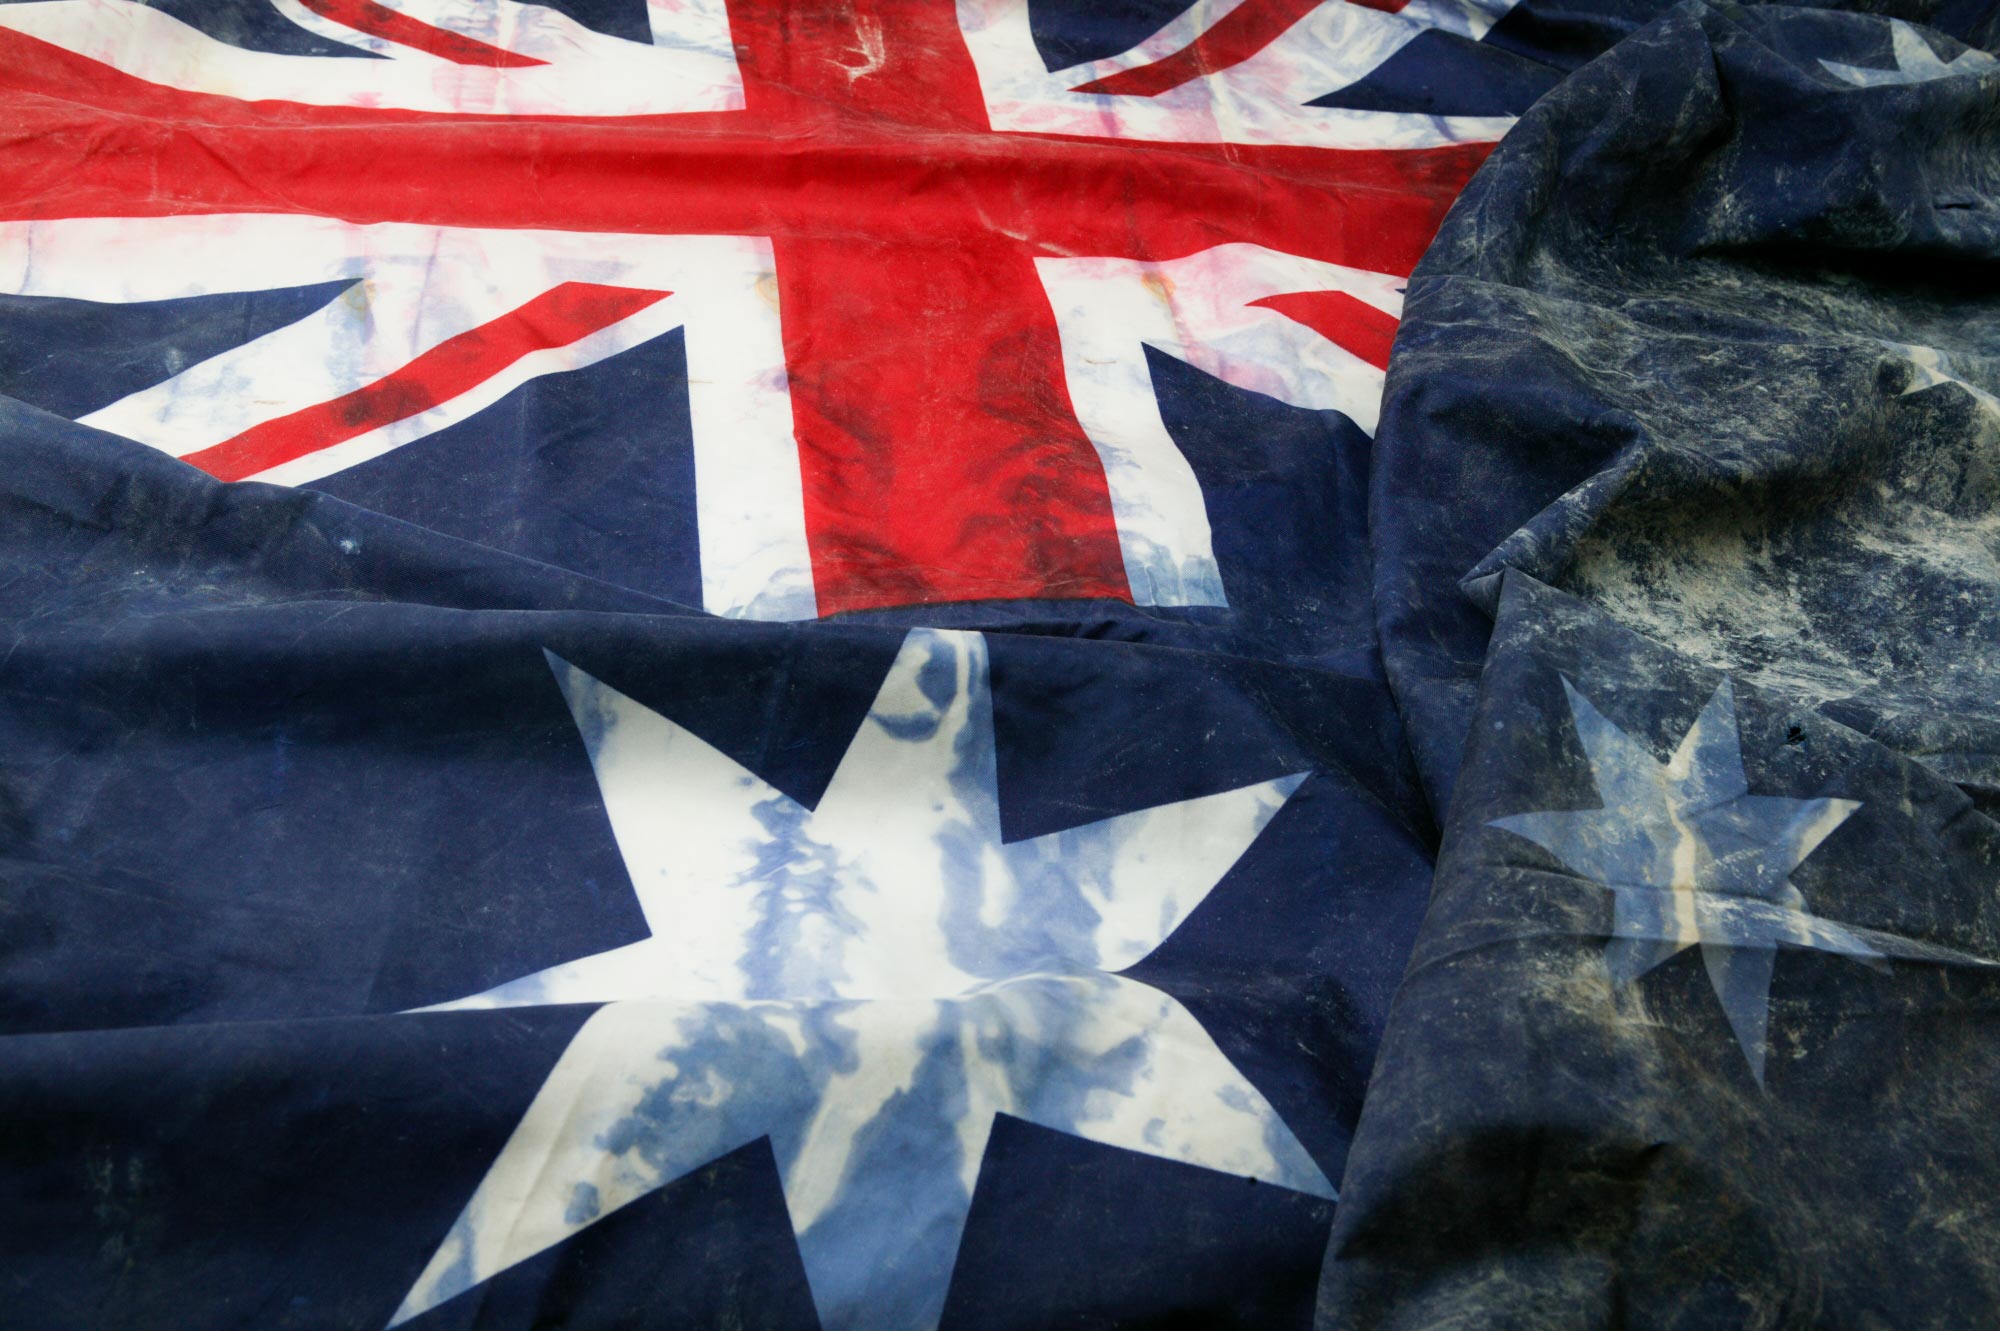 Australian flag recovered from the ruins of the World Trade Center, New York, after September 11, 2001.